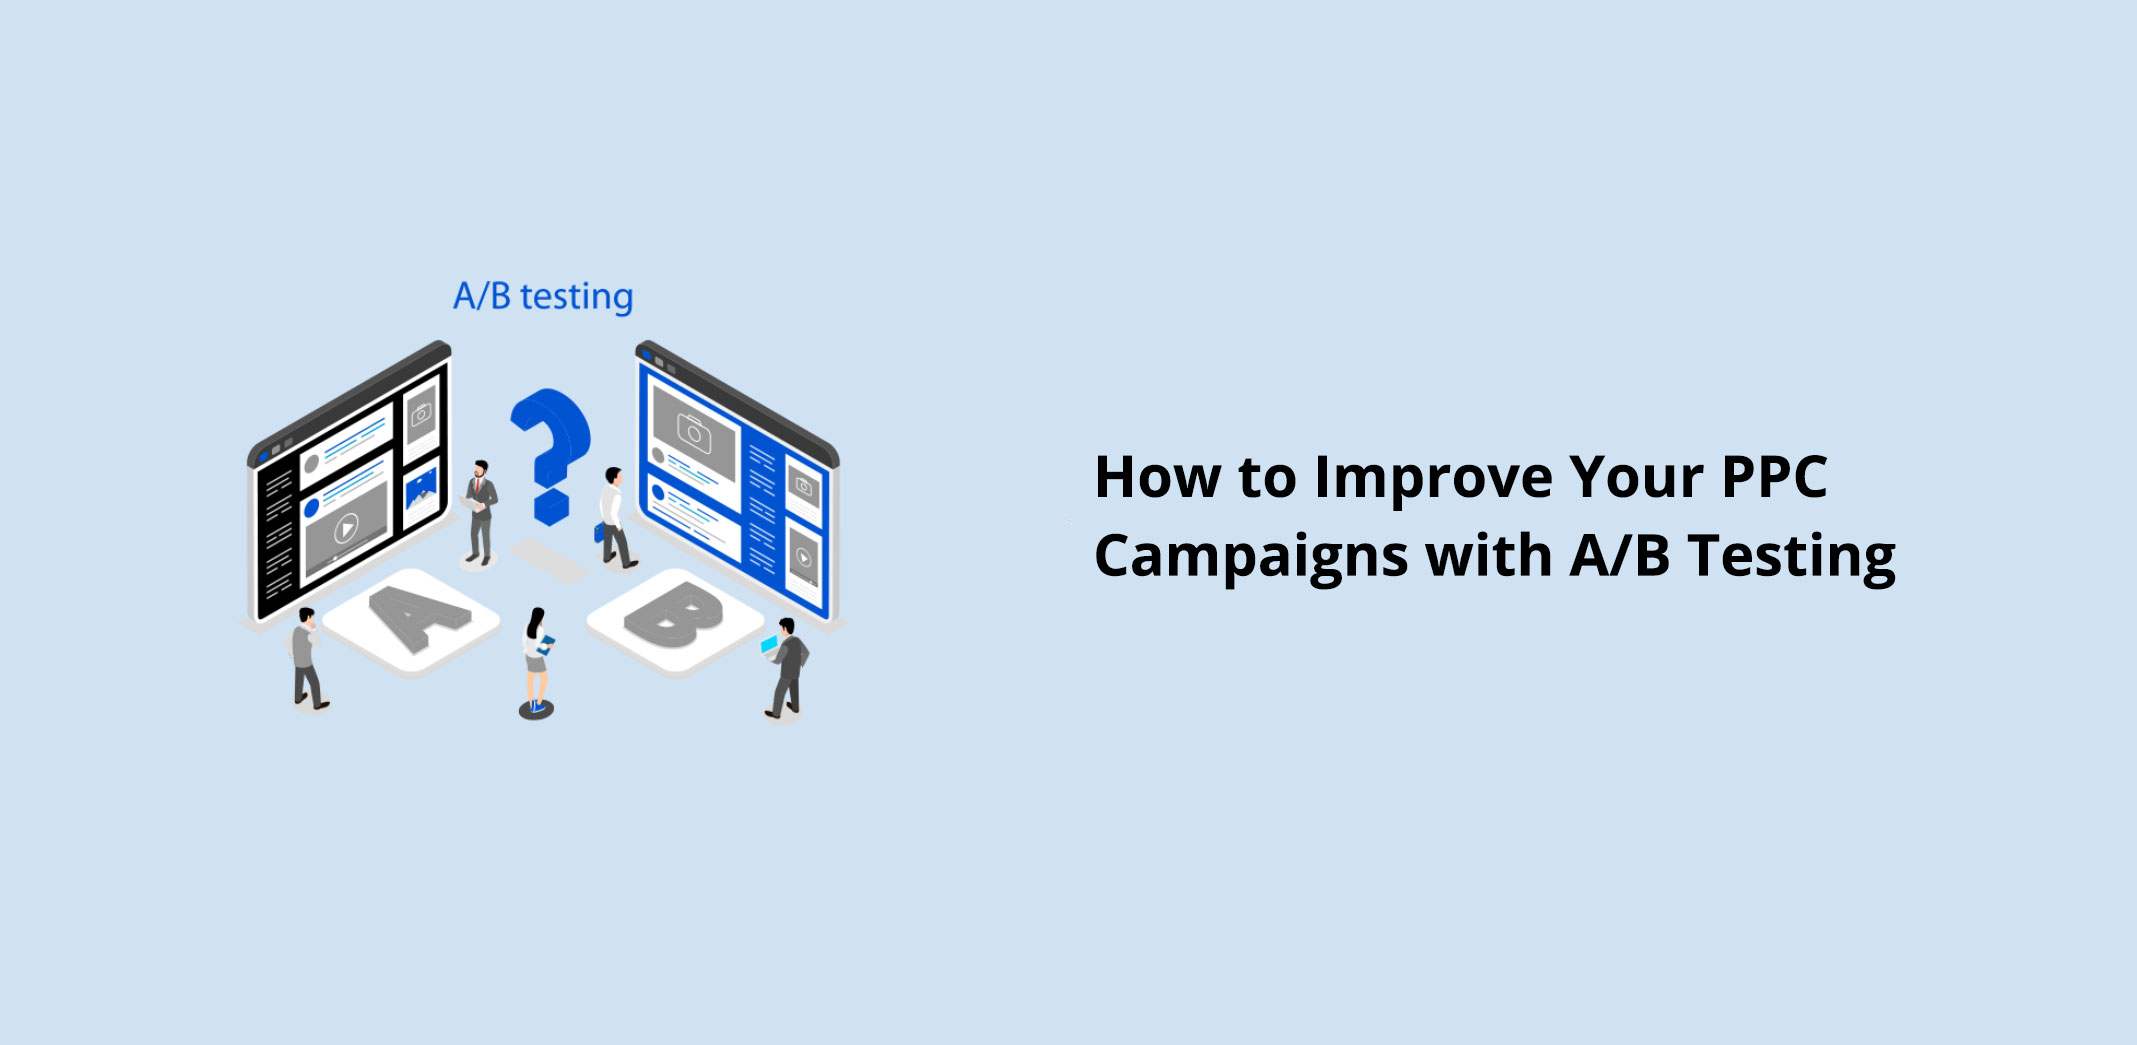 How to Improve Your PPC Campaigns with A/B Testing